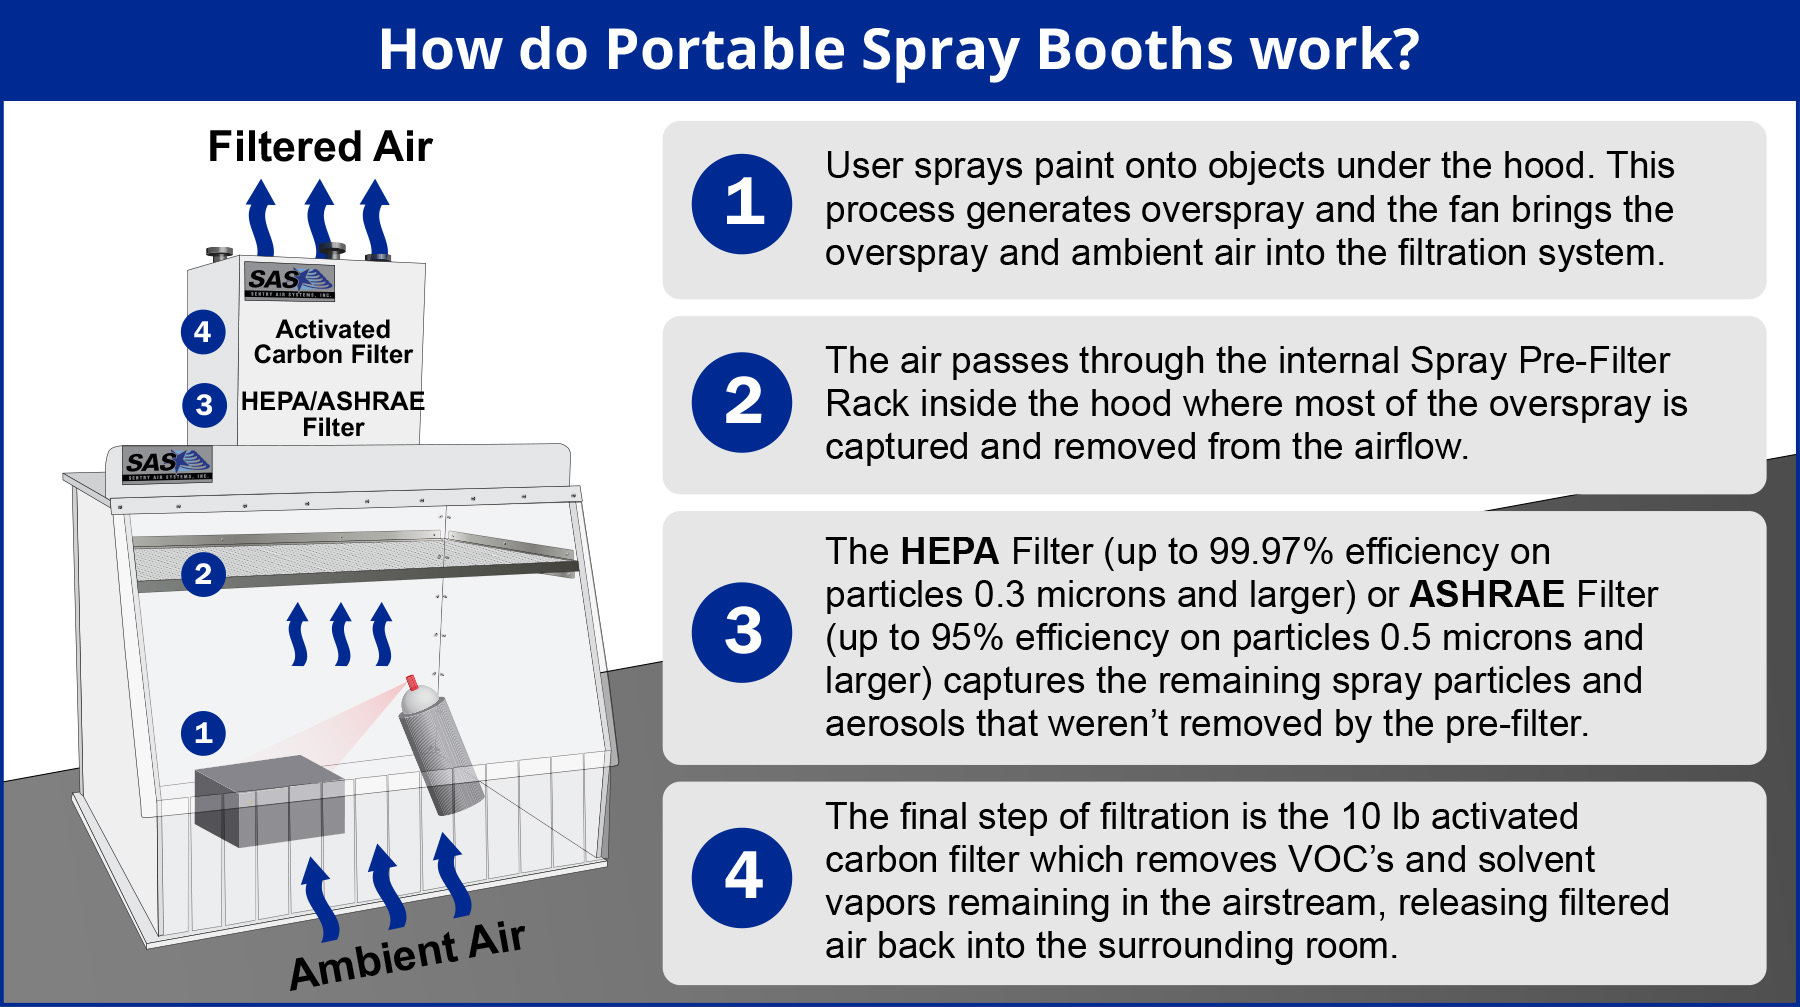 Why paint booth air filters should be inspected and changed regularly?